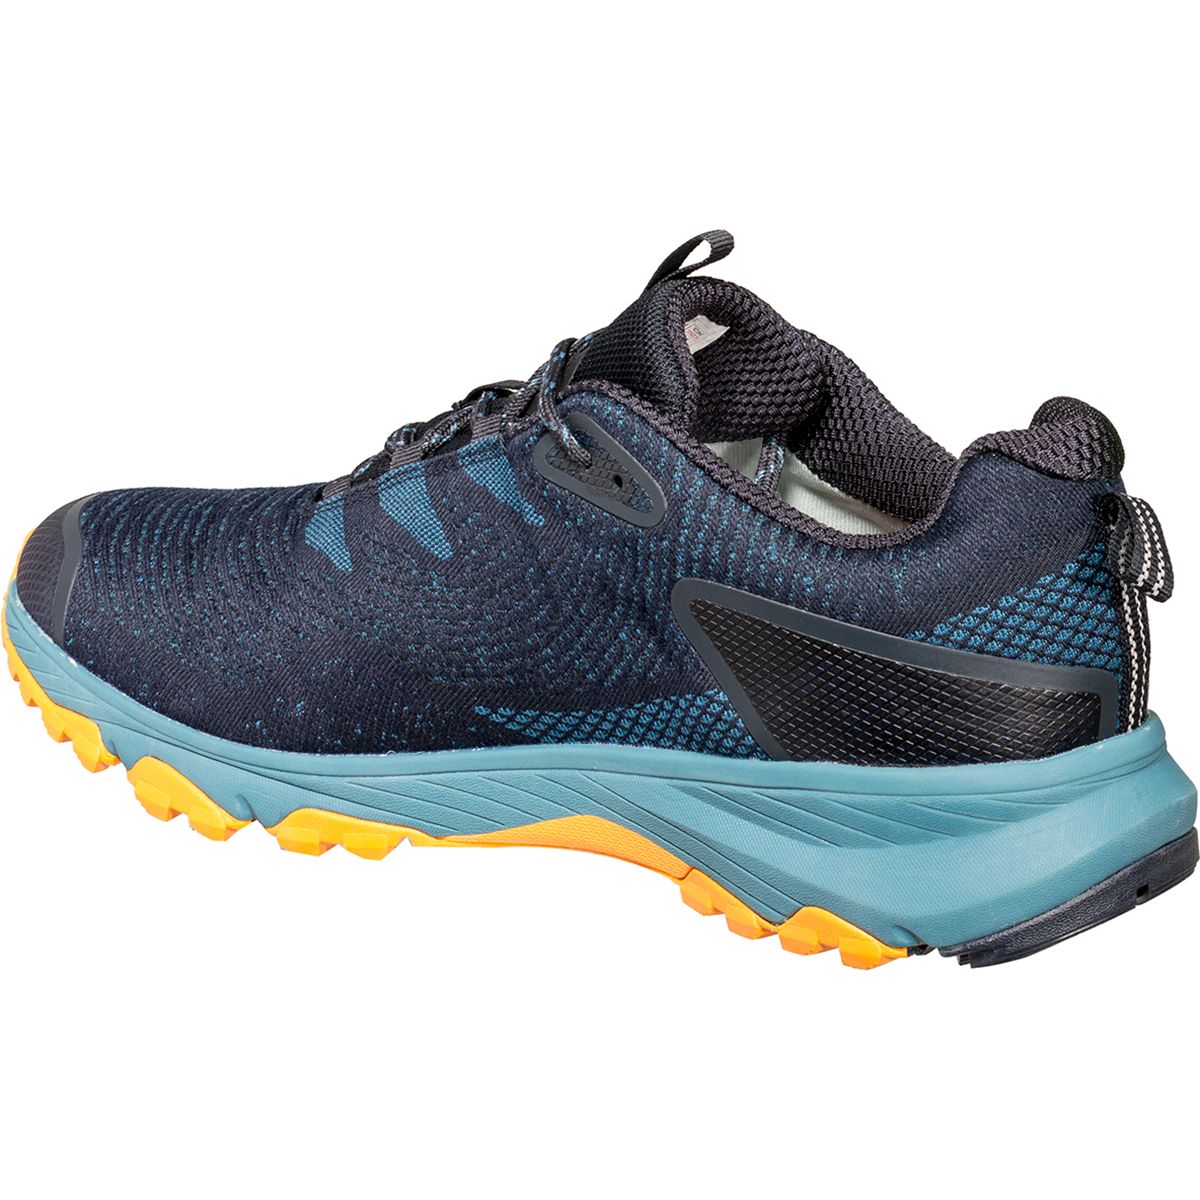 The North Face Ultra Fastpack III GTX Woven Hiking Shoe - Men's ...